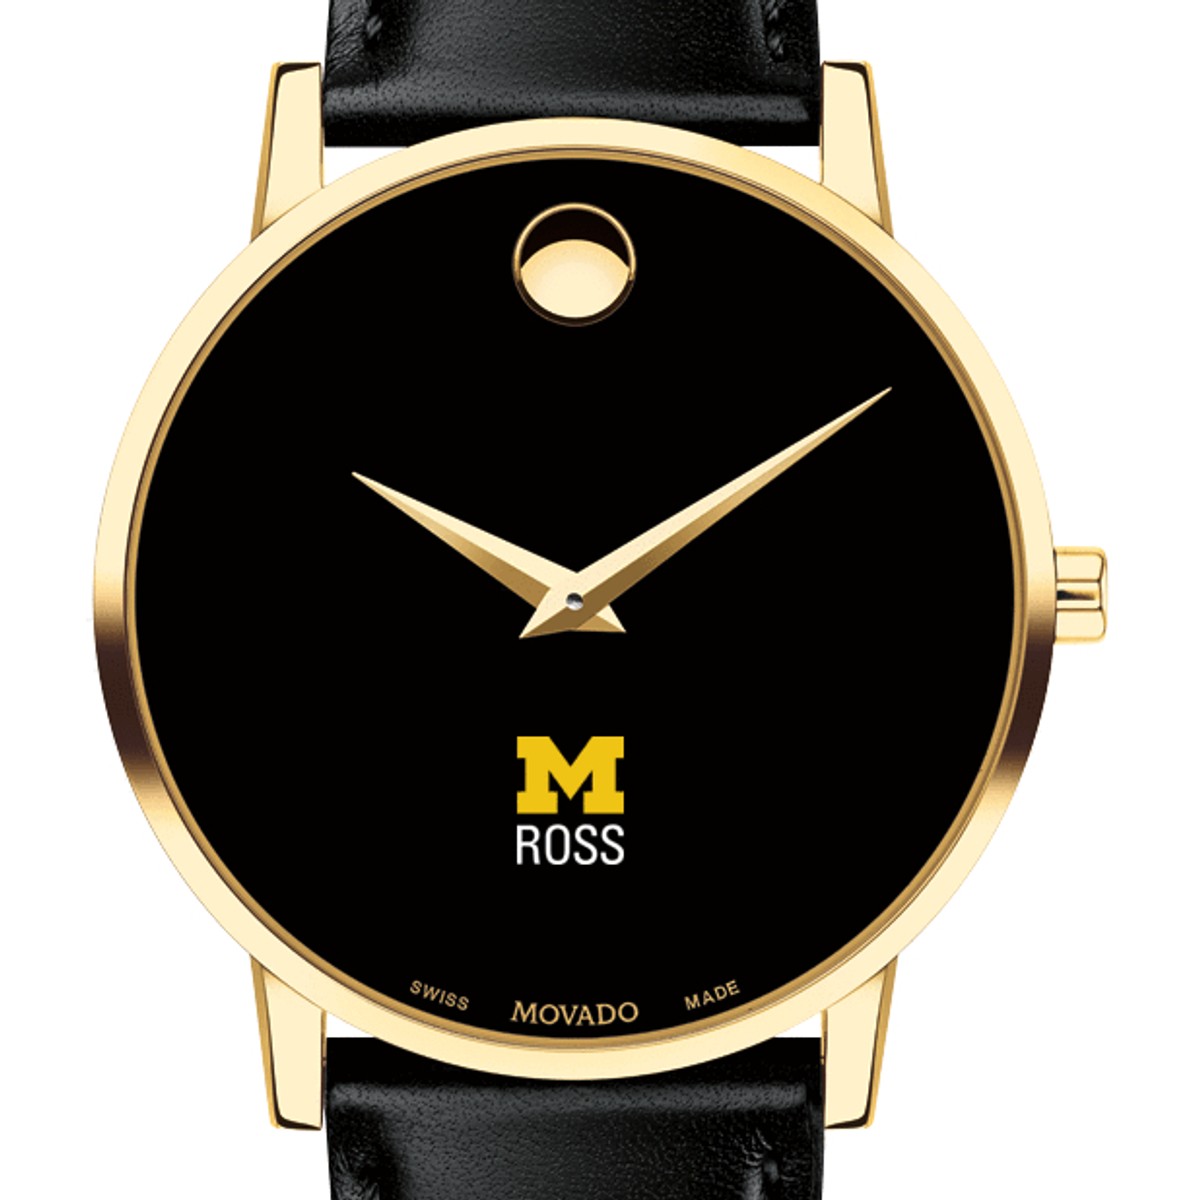 Michigan Ross Men's Movado Gold Museum Classic Leather at M.LaHart & Co.